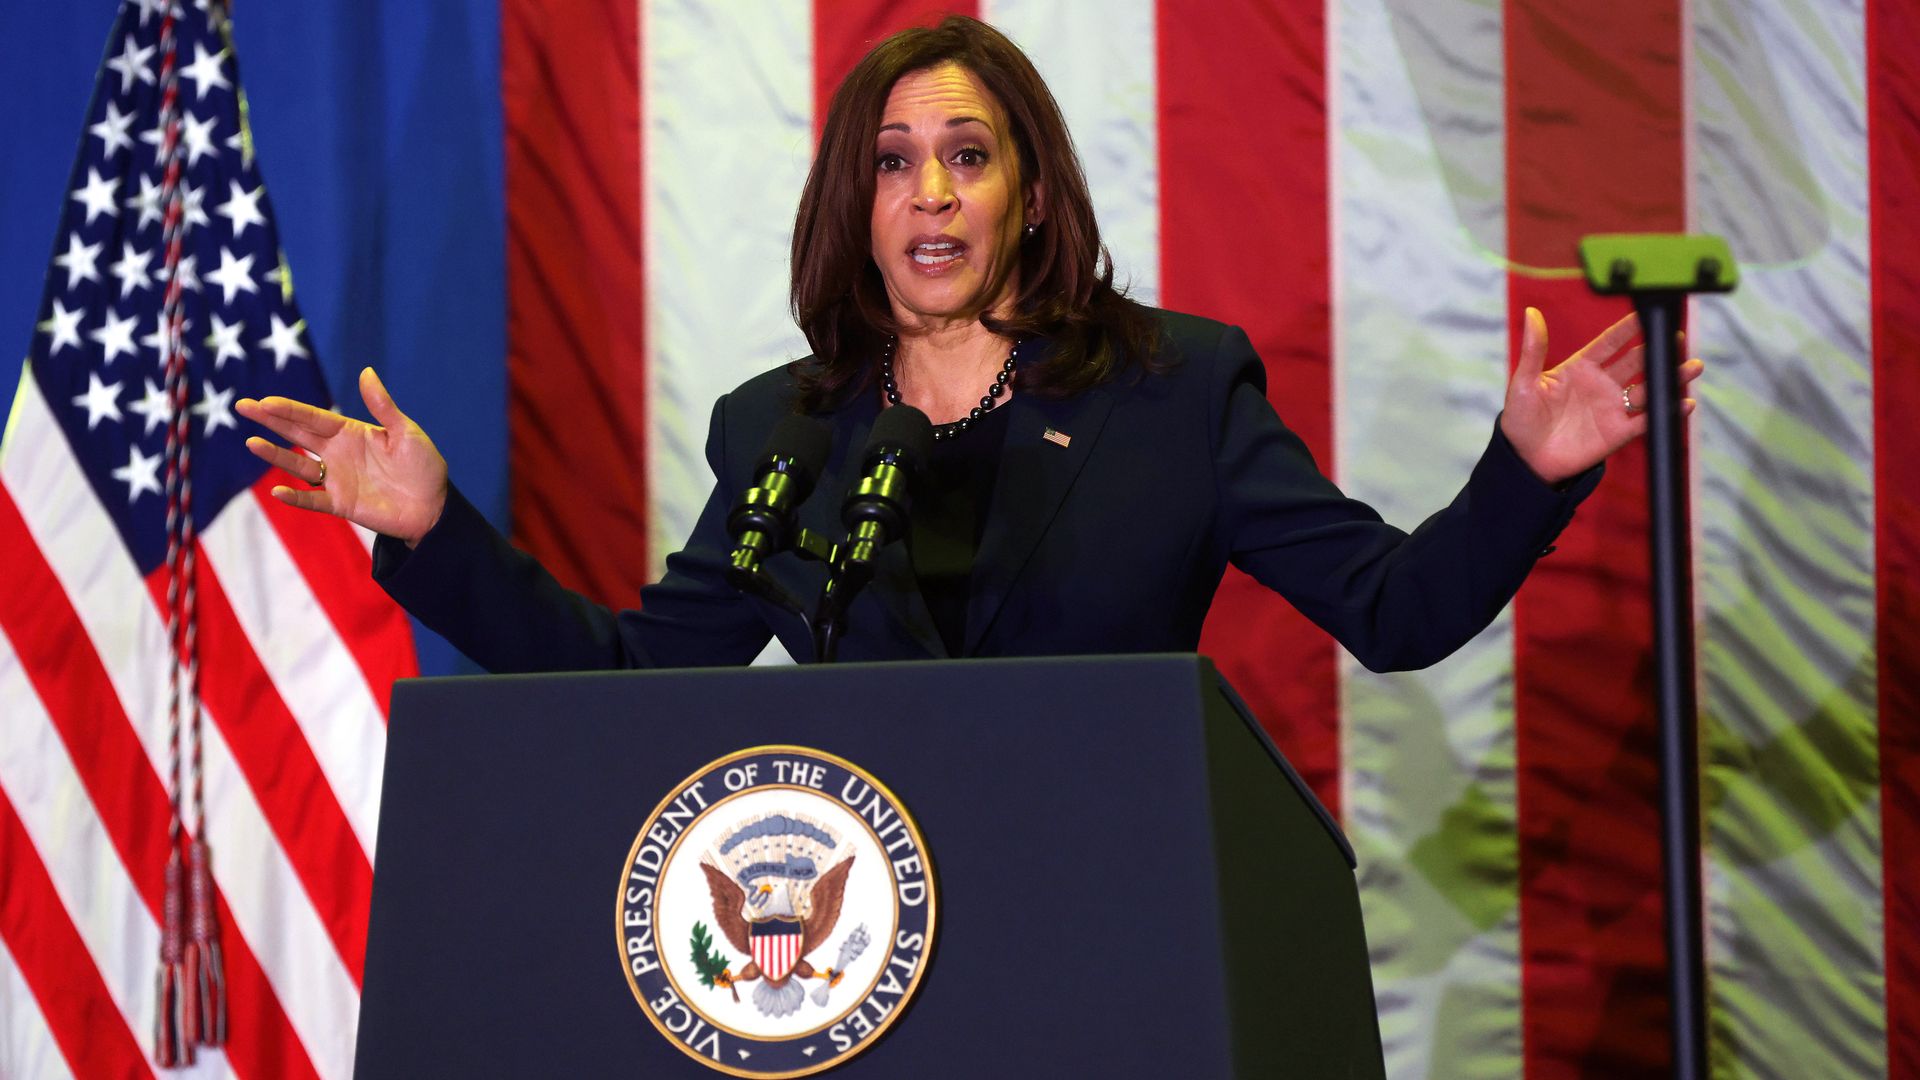 Vice President Kamala Harris is seen making an infrastructure announcement.